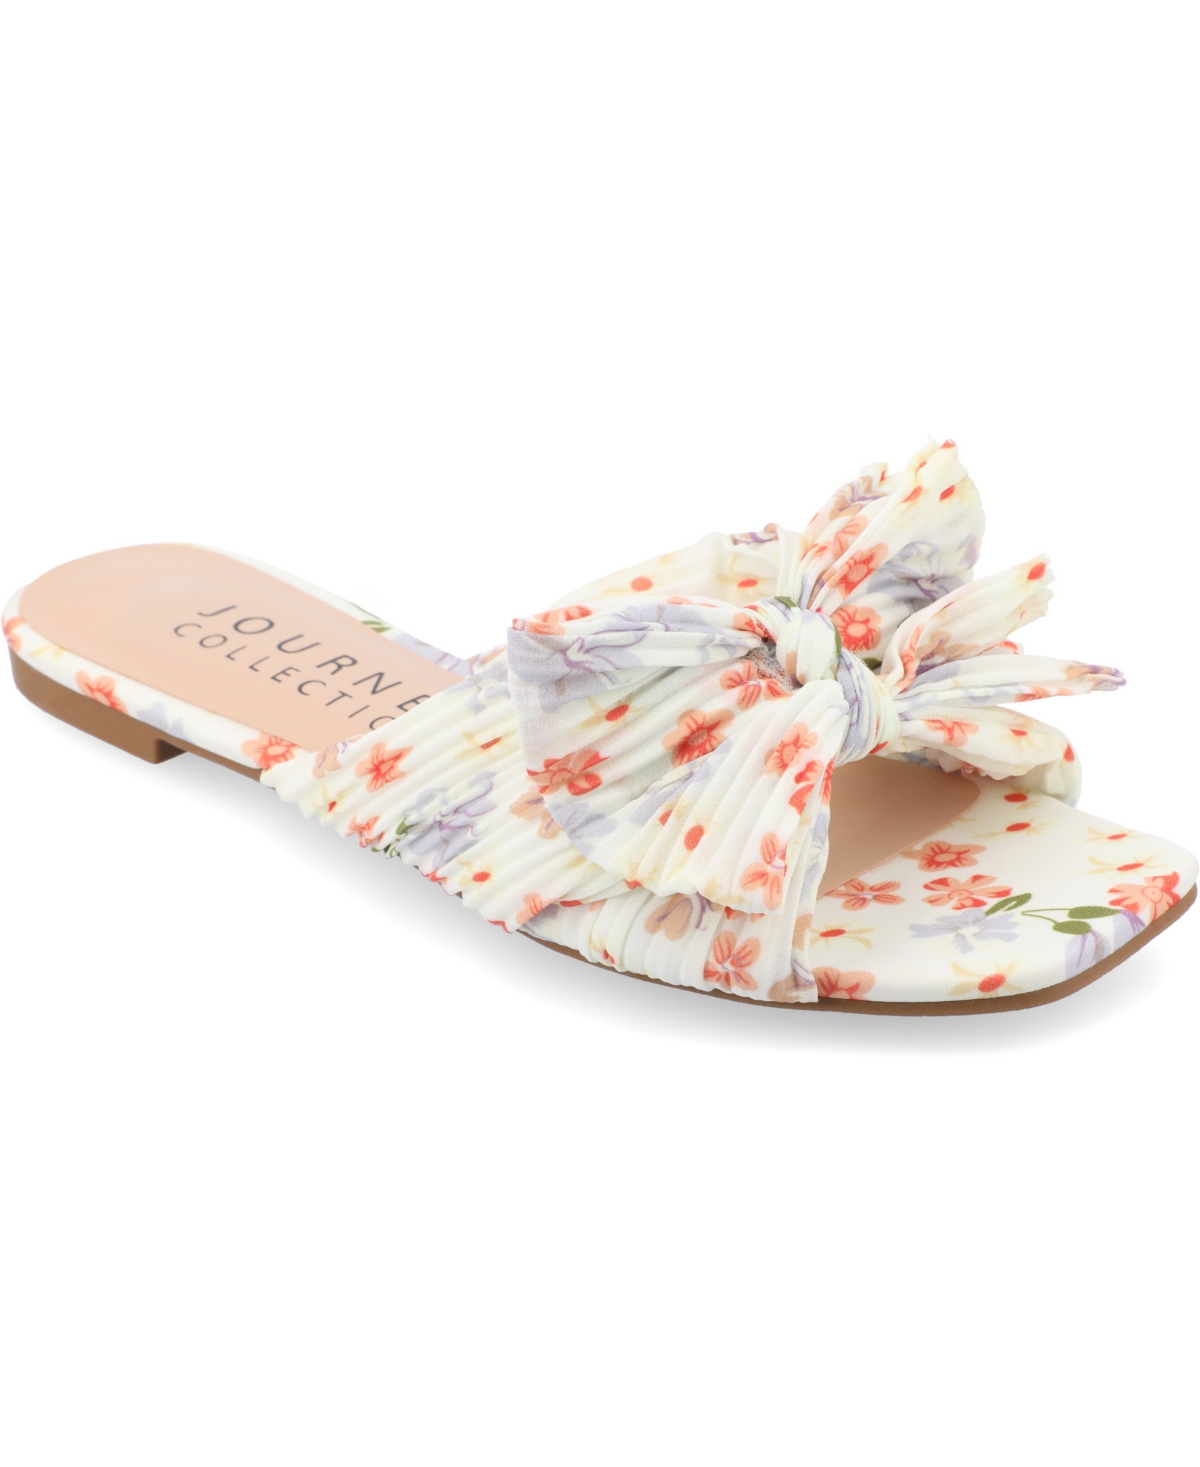 Shop Journee Collection Women's Serlina Bow Flat Sandals In Light Floral Manmade- Metallic Fabric